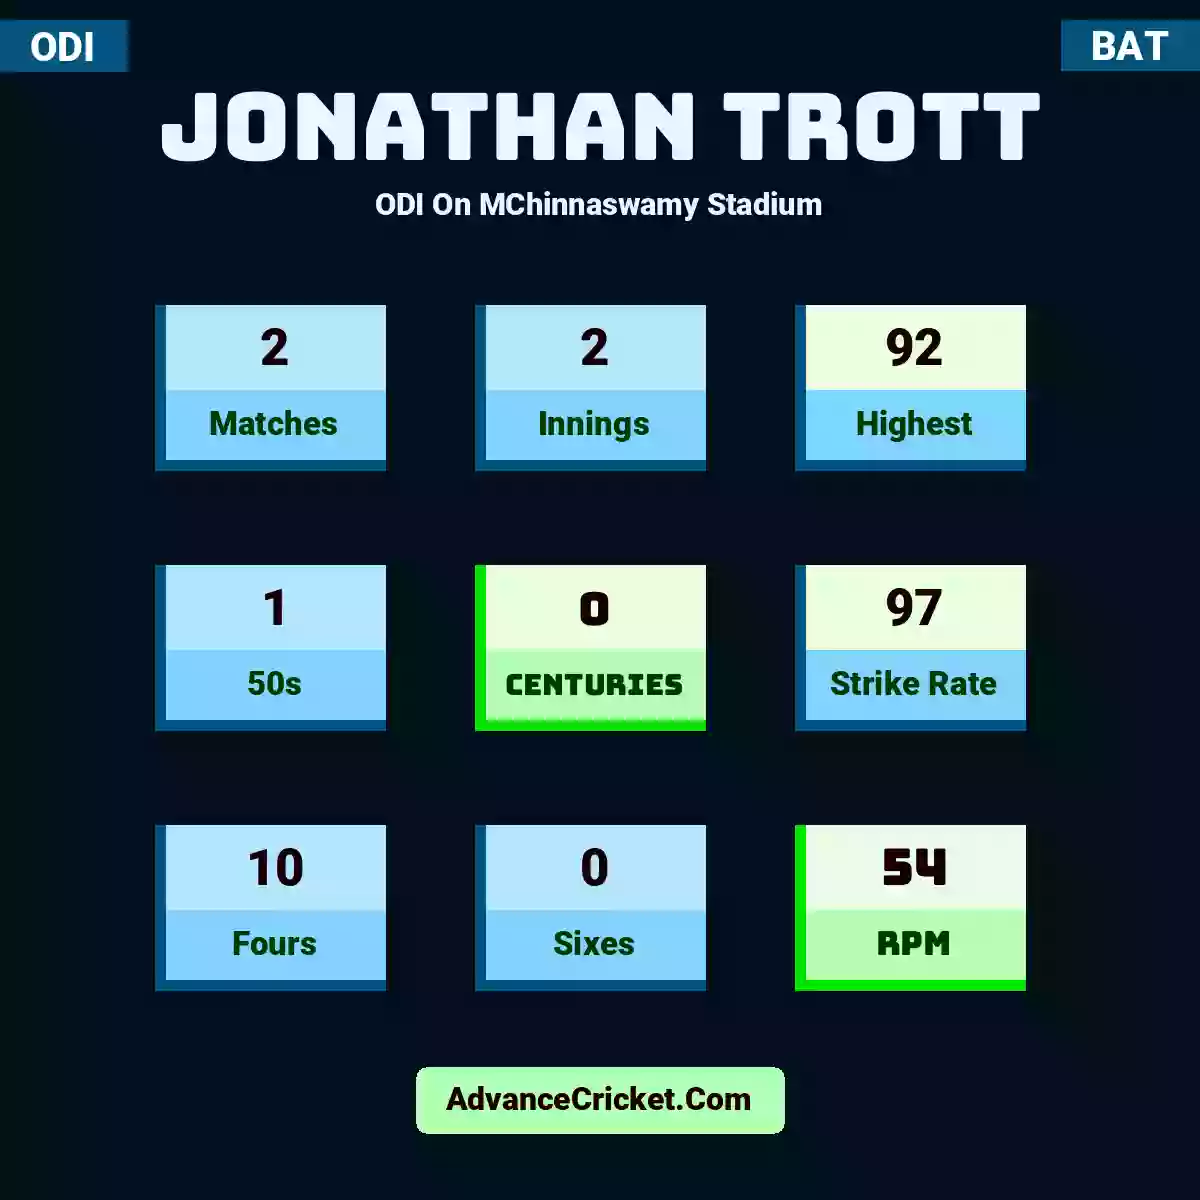 Jonathan Trott ODI  On MChinnaswamy Stadium, Jonathan Trott played 2 matches, scored 92 runs as highest, 1 half-centuries, and 0 centuries, with a strike rate of 97. J.Trott hit 10 fours and 0 sixes, with an RPM of 54.